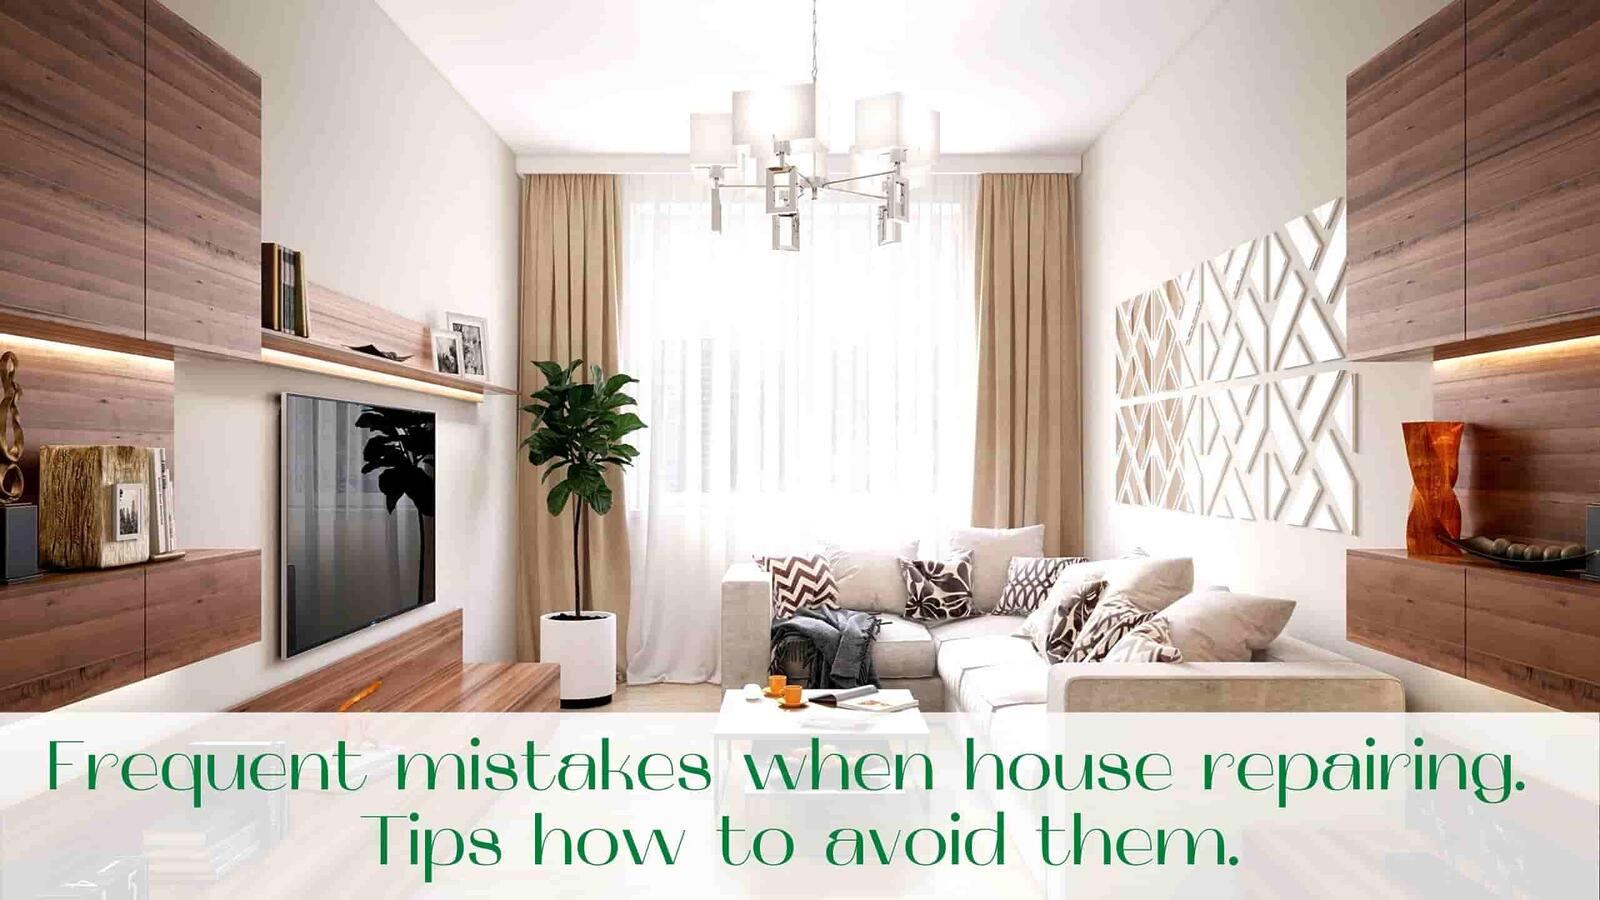 Frequent mistakes when house repairing in Brampton. Tips how to avoid them.